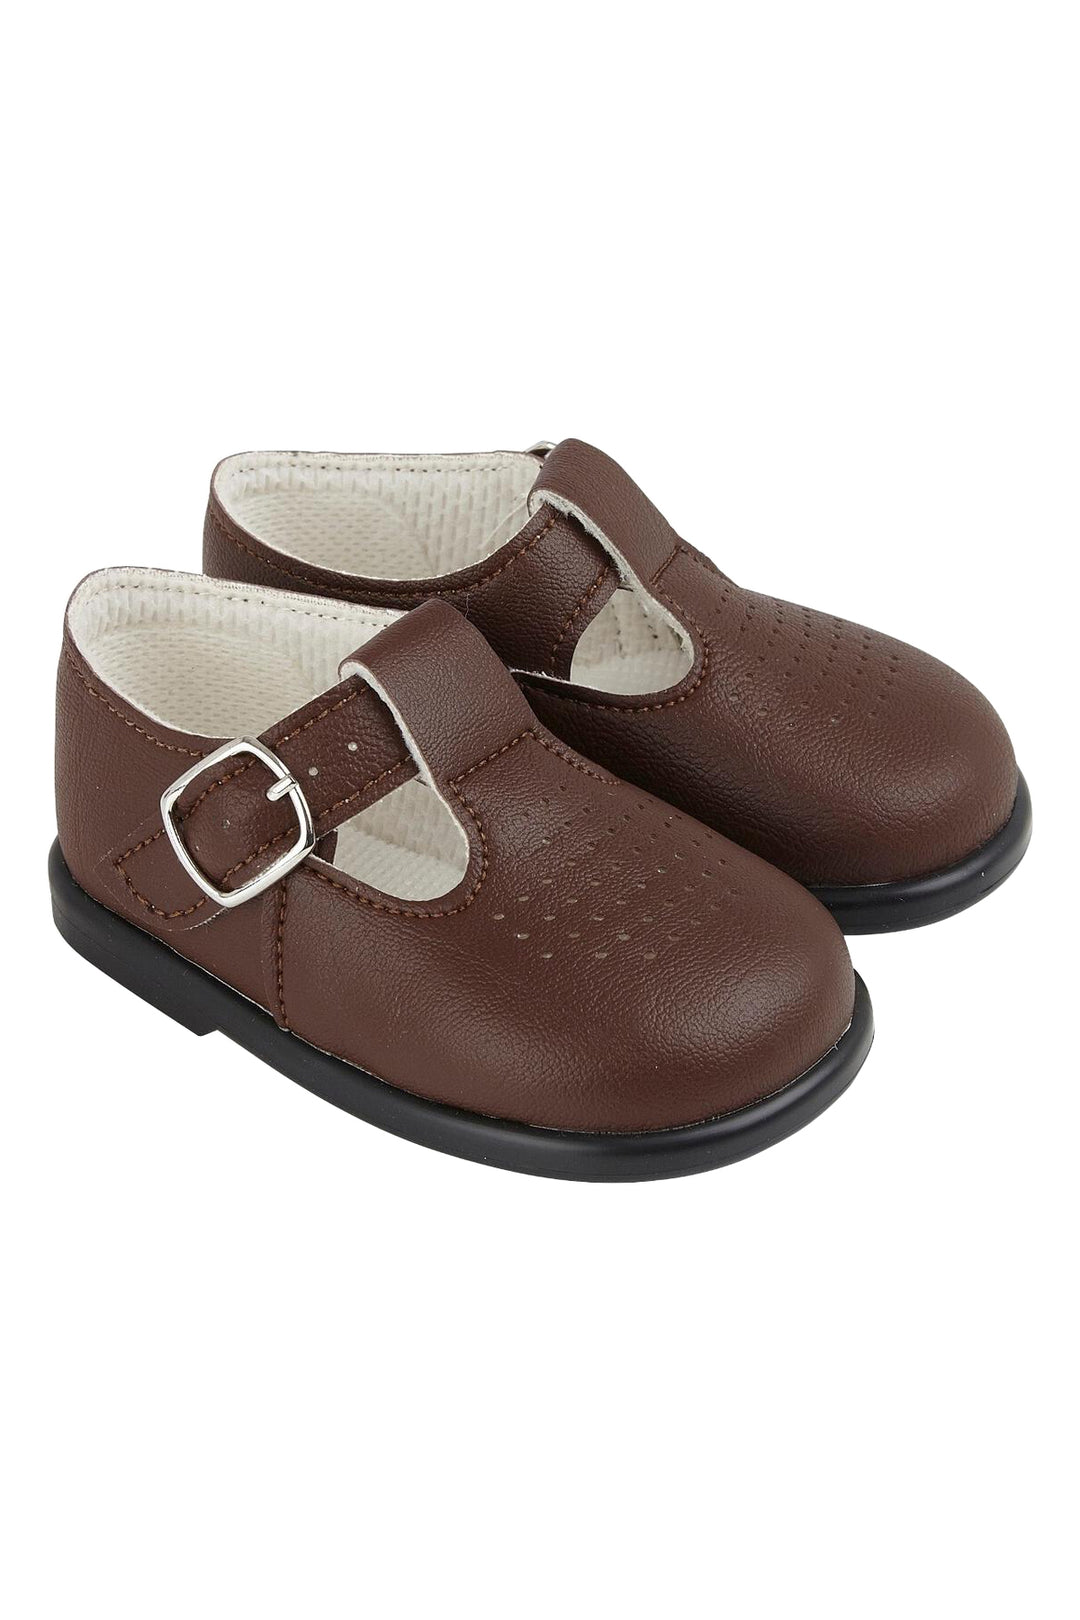 Baypods Brown T-Bar Hard Sole Shoes | iphoneandroidapplications